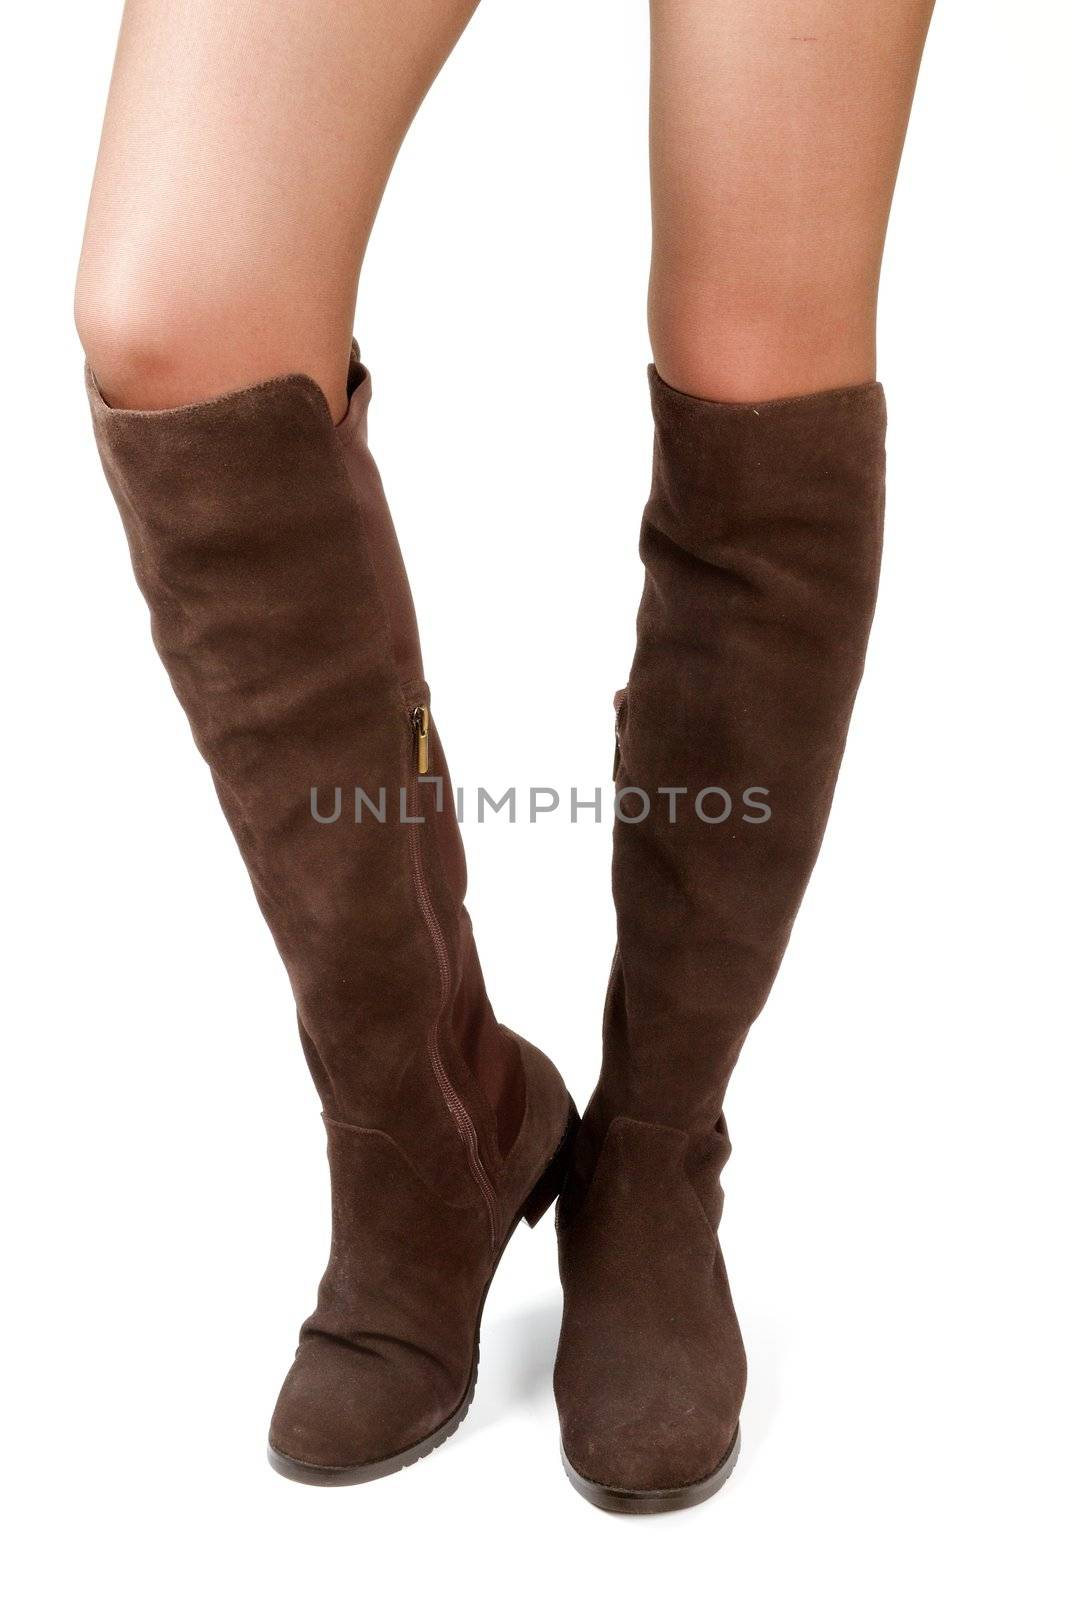 Brown Chamois Leather Women's High Boots isolated on white background